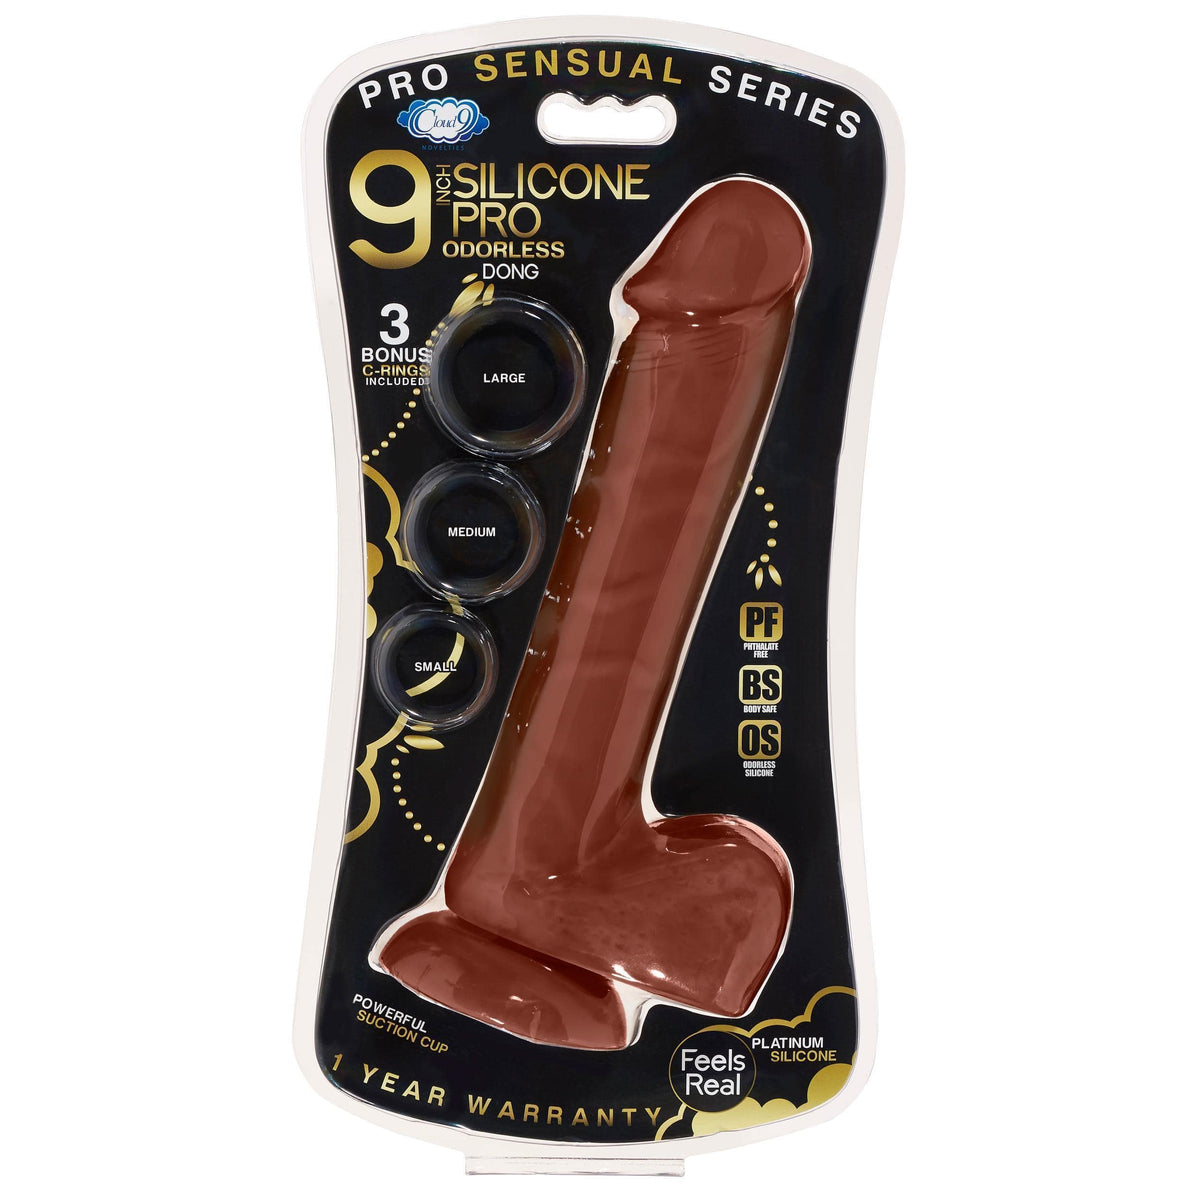 9 silicone pro odorless dong brown